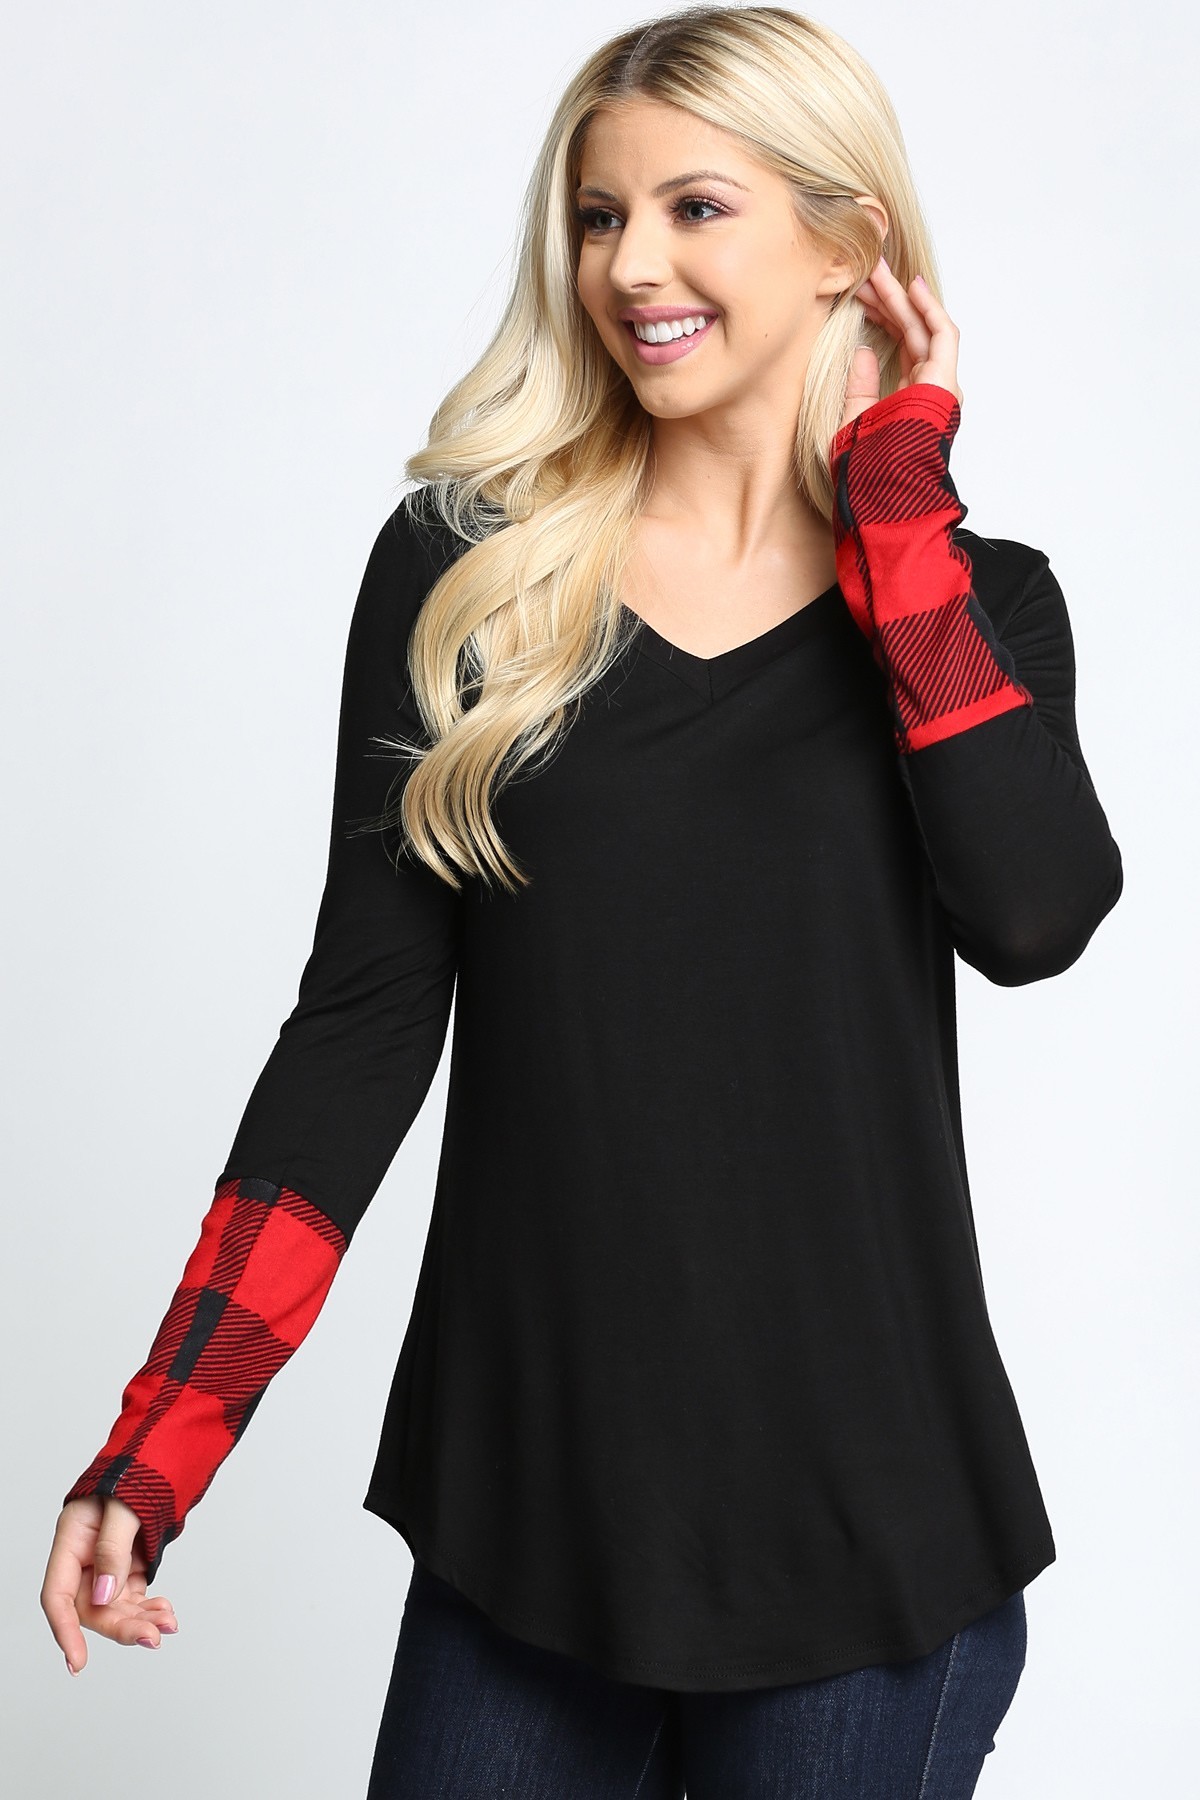 Red Wholesale Plaid Cuff Solid Contrast V Neck Long Sleeve Top